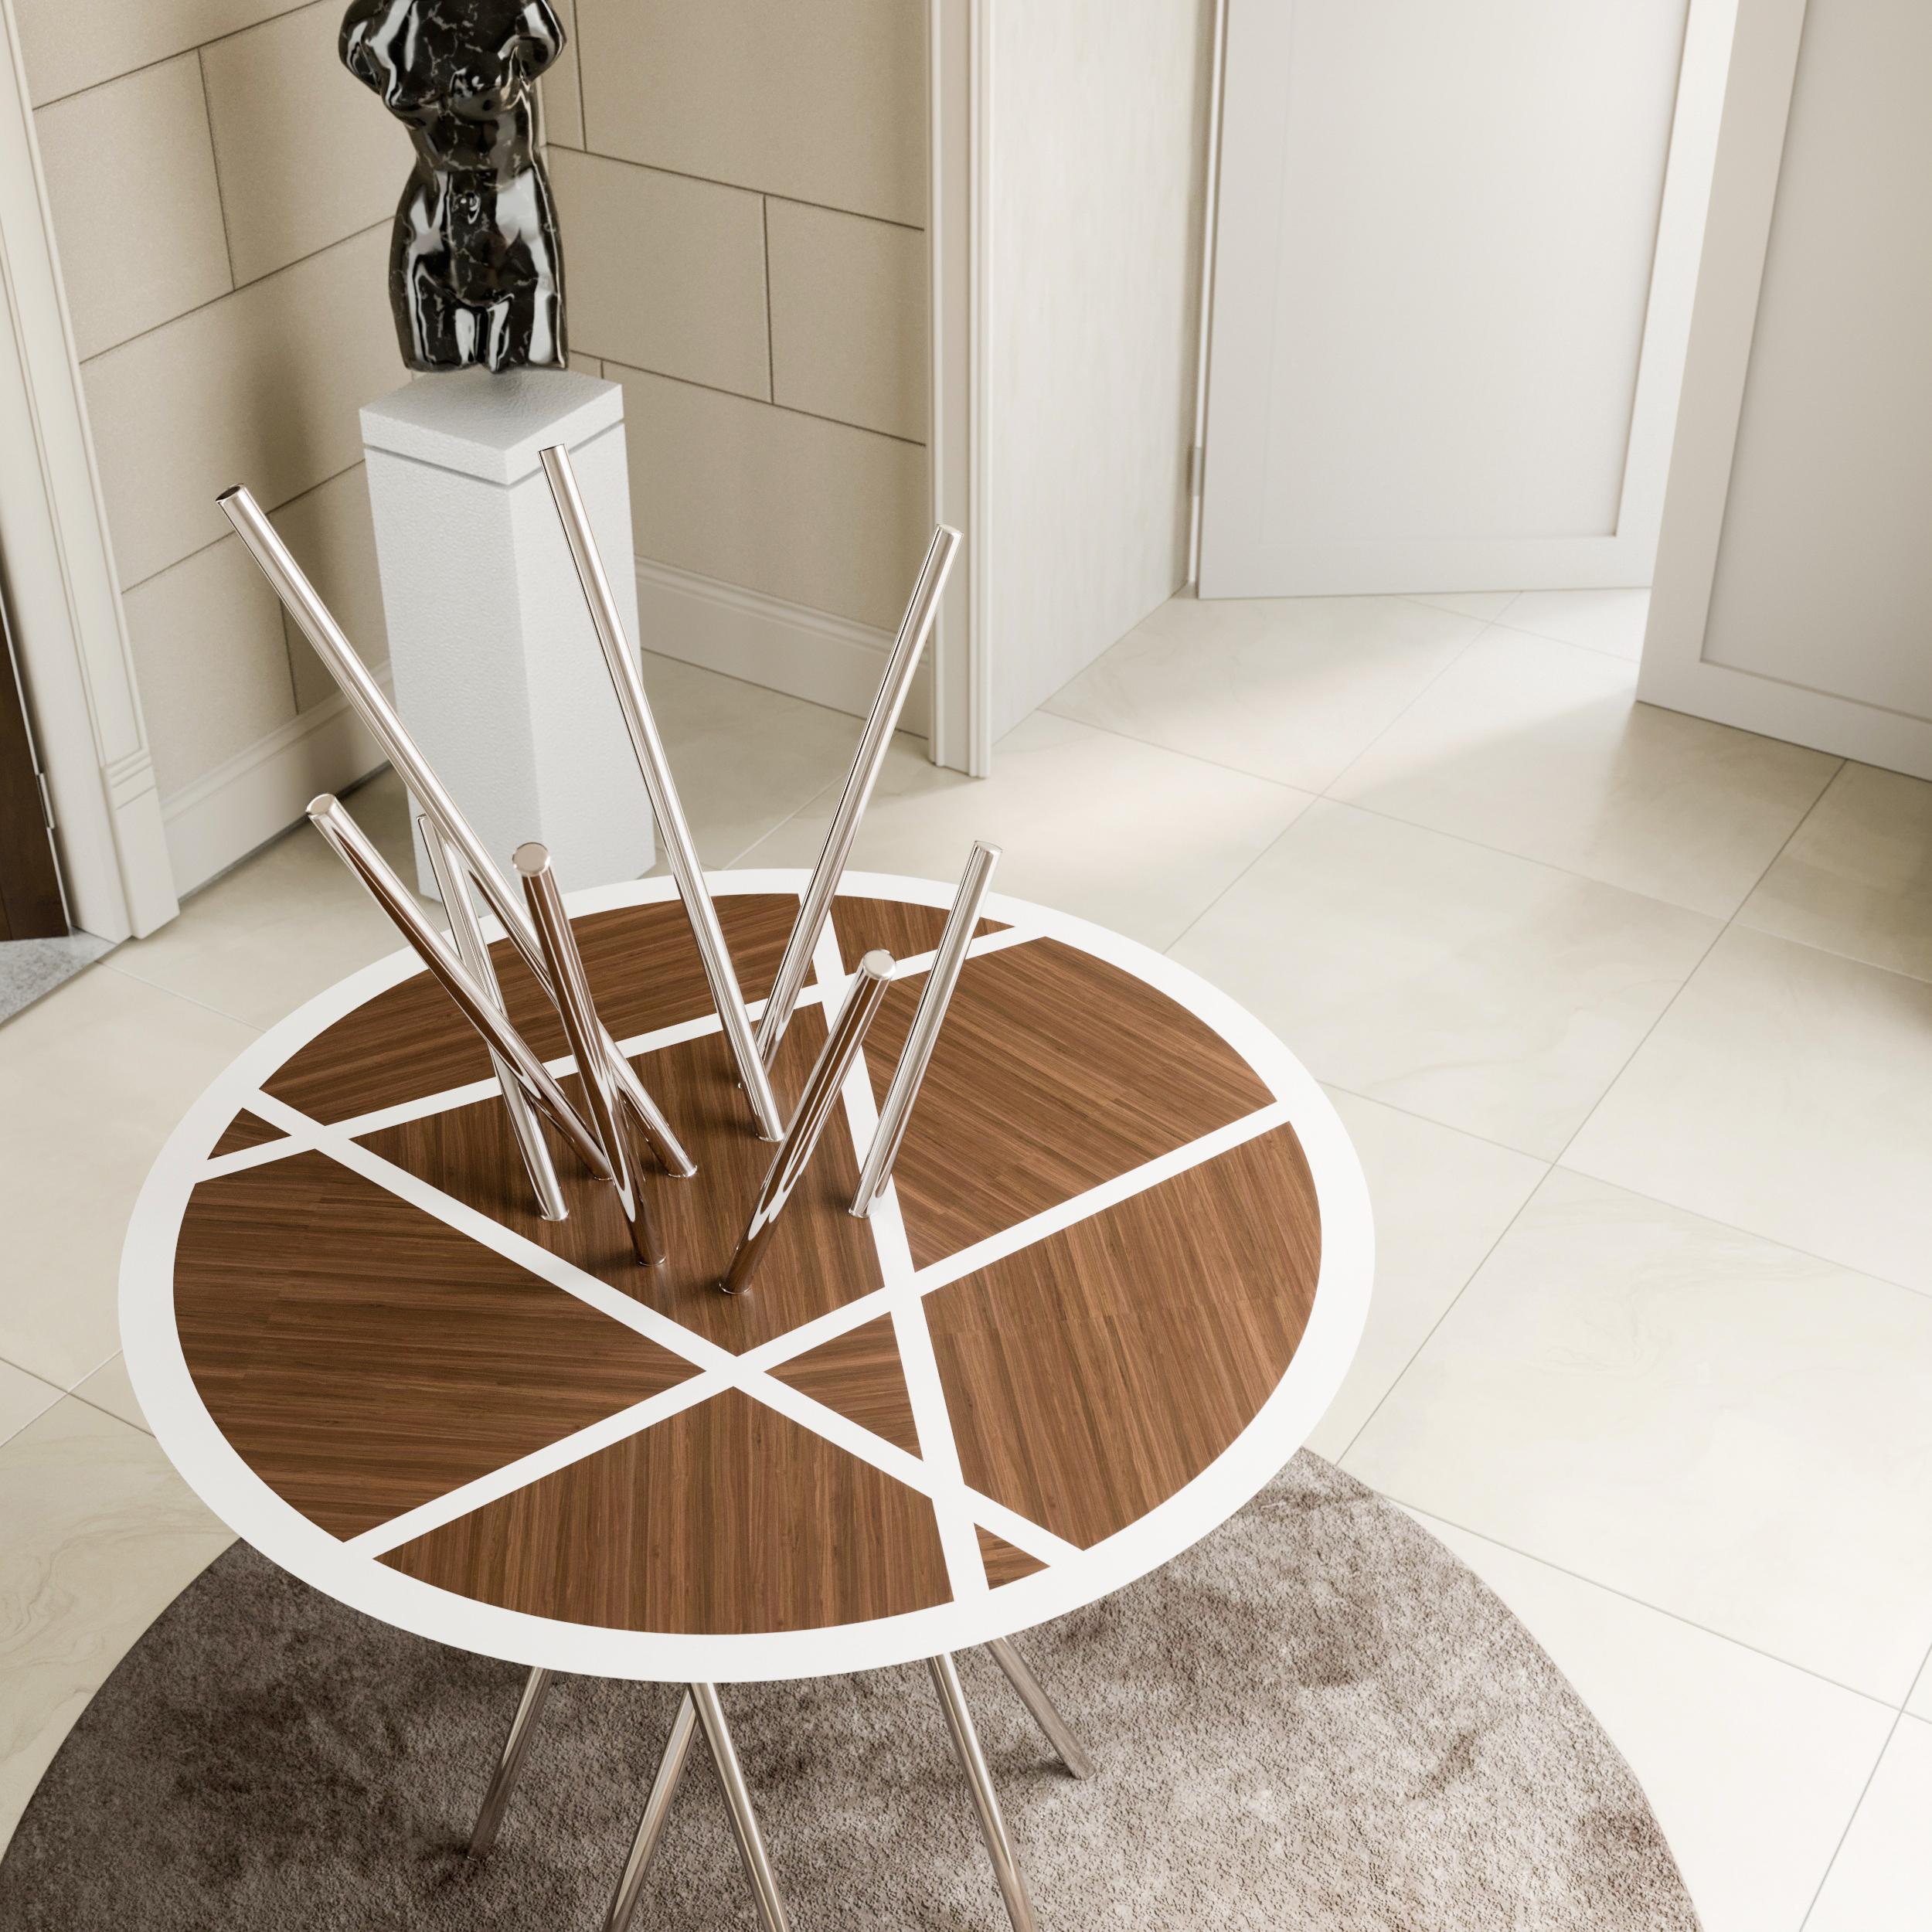 Acier inoxydable The Modernity Round Pedestal Table Walnut Wood White Lacquer Brushed Stainless Steel (en anglais) en vente